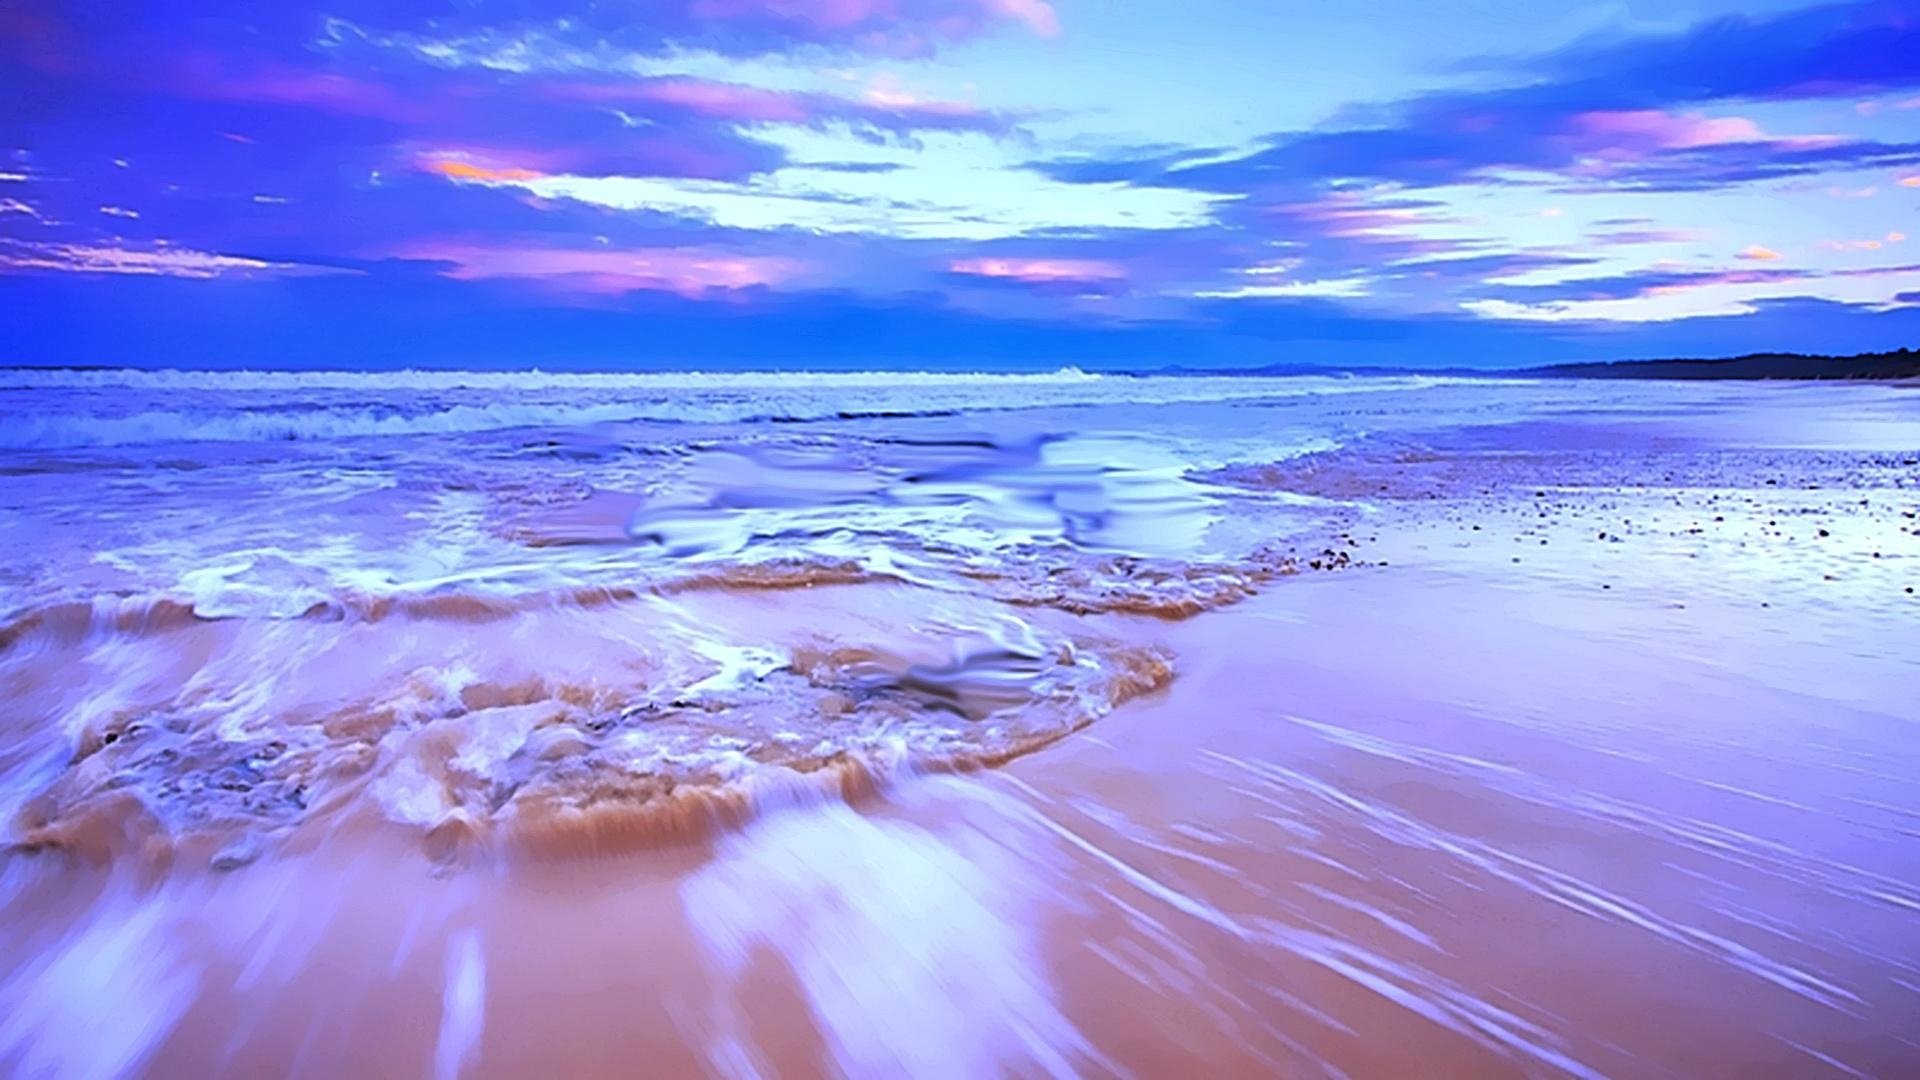 Beach Sunset in Pink and Blue Image - ID: 244461 - Image Abyss